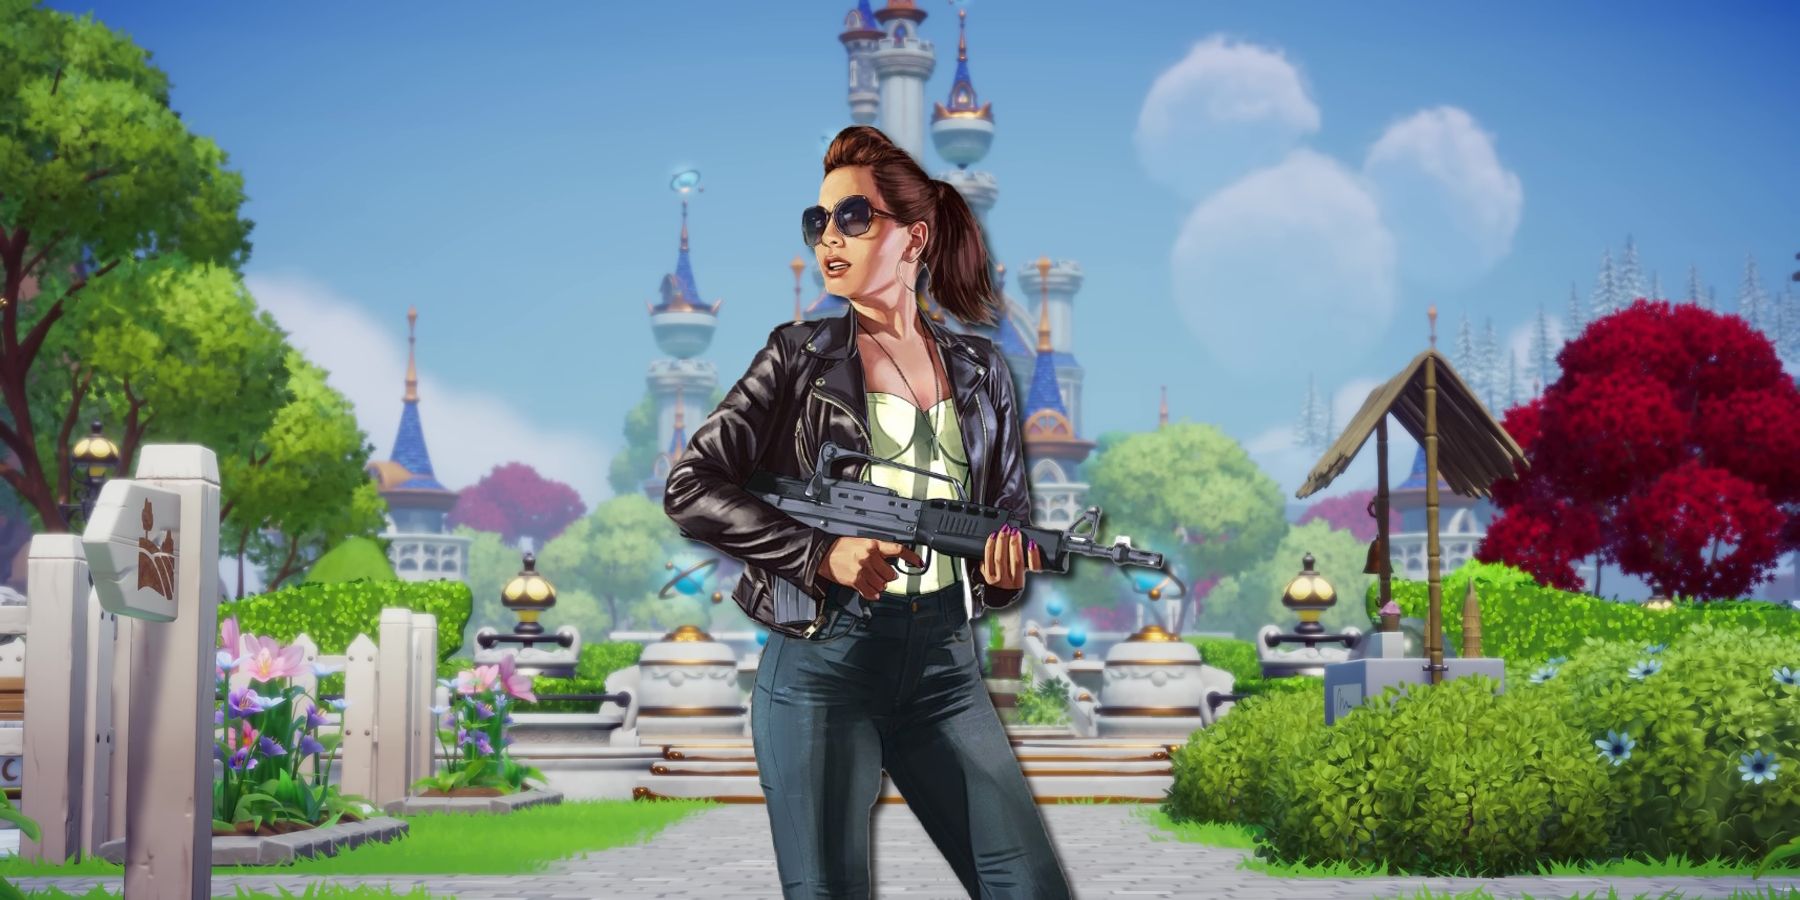 A picture of Lucia from Grand Theft Auto 6 over a screenshot from Disney's Dreamlight Valley